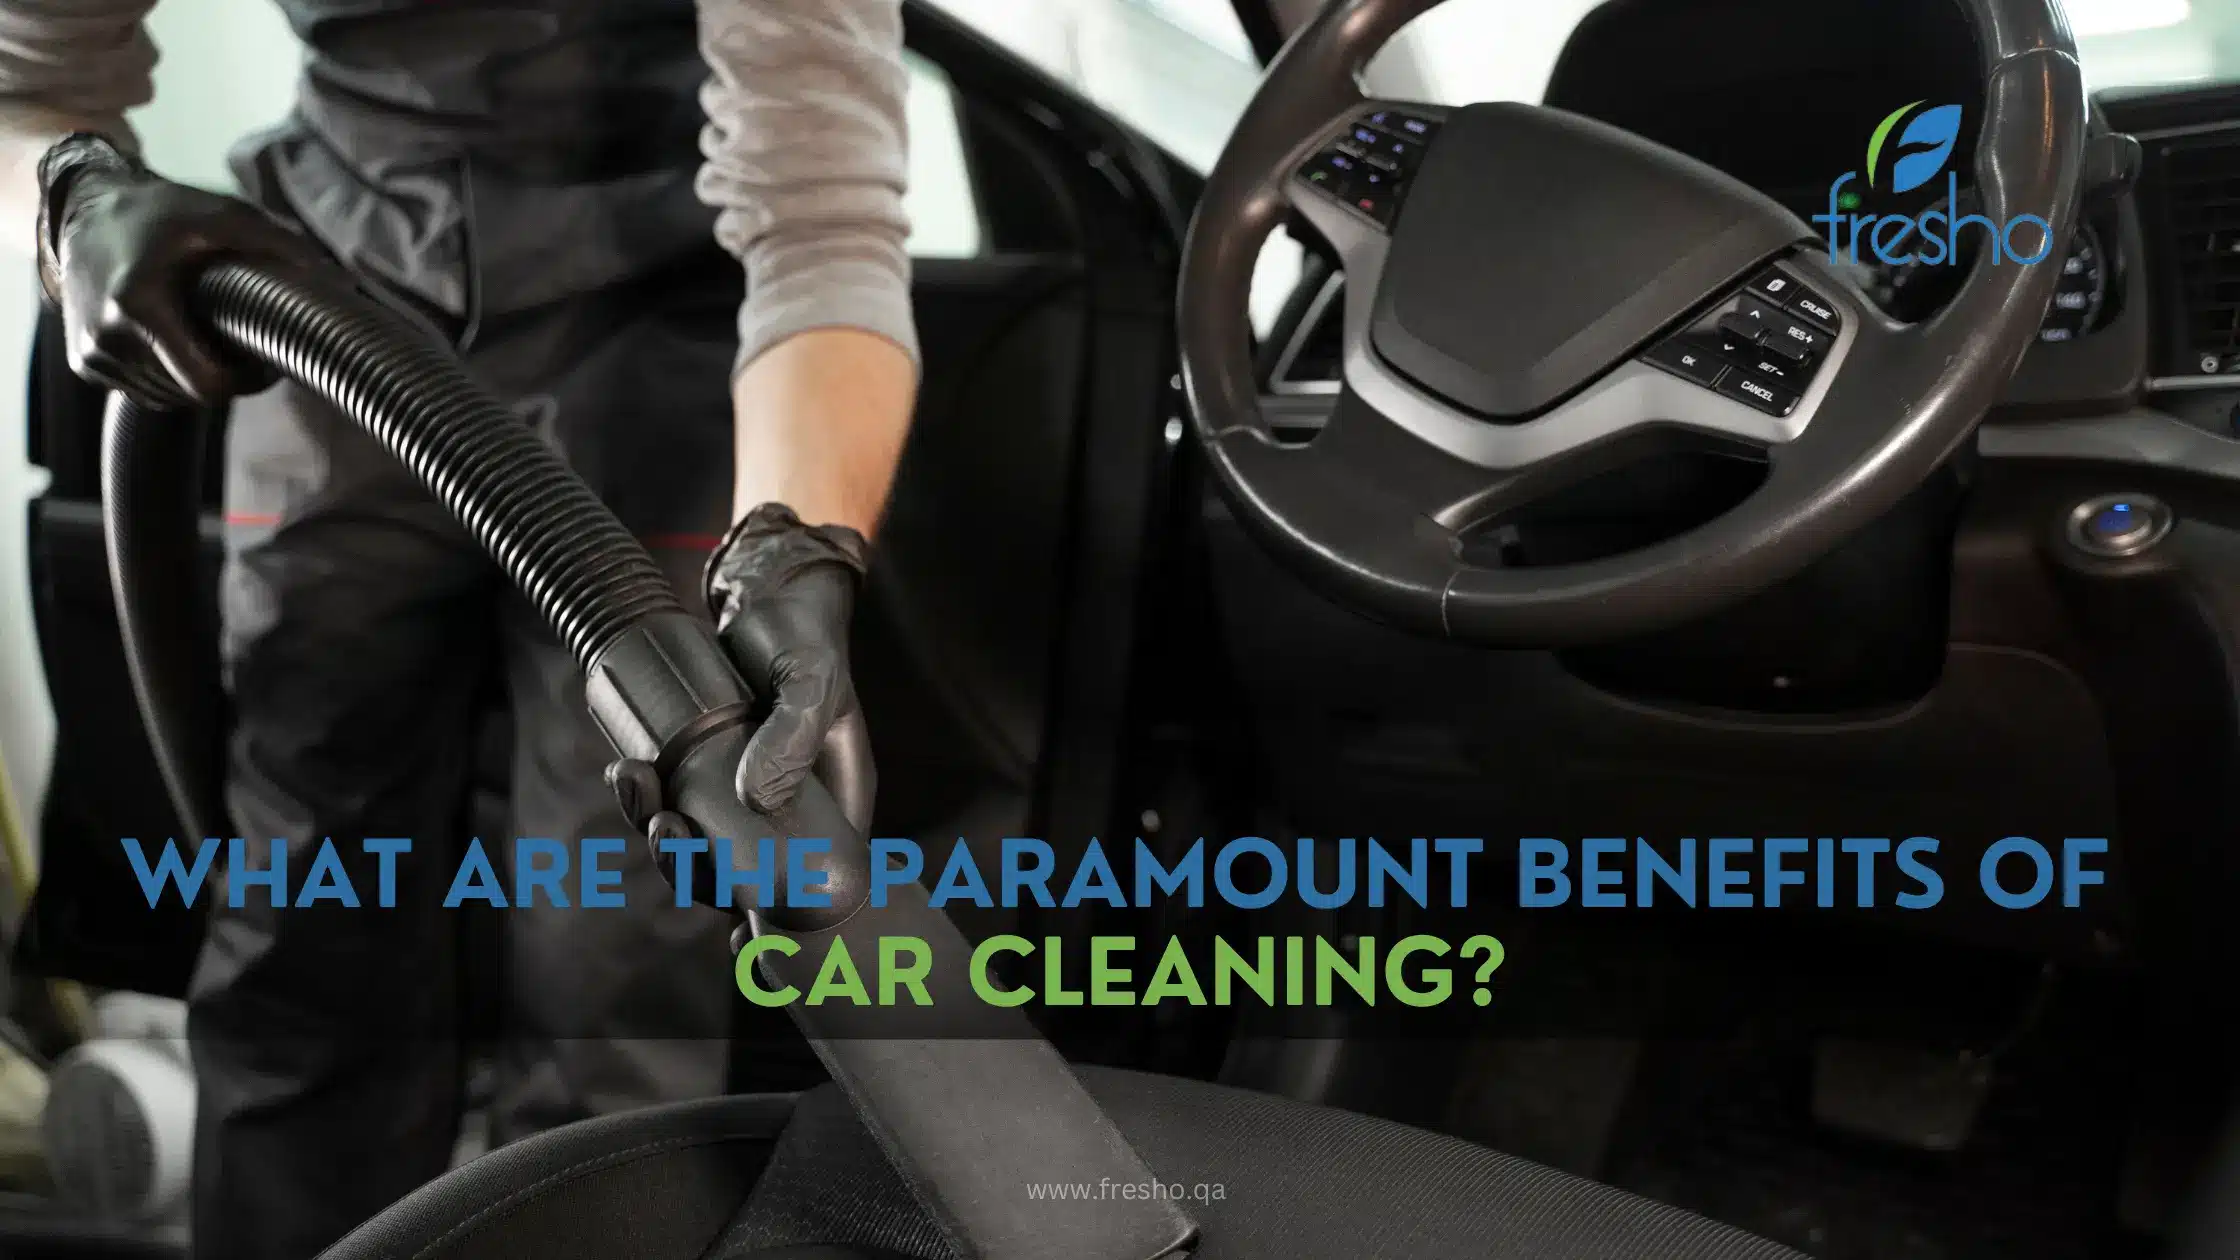 What Are the Paramount Benefits of Car Cleaning?